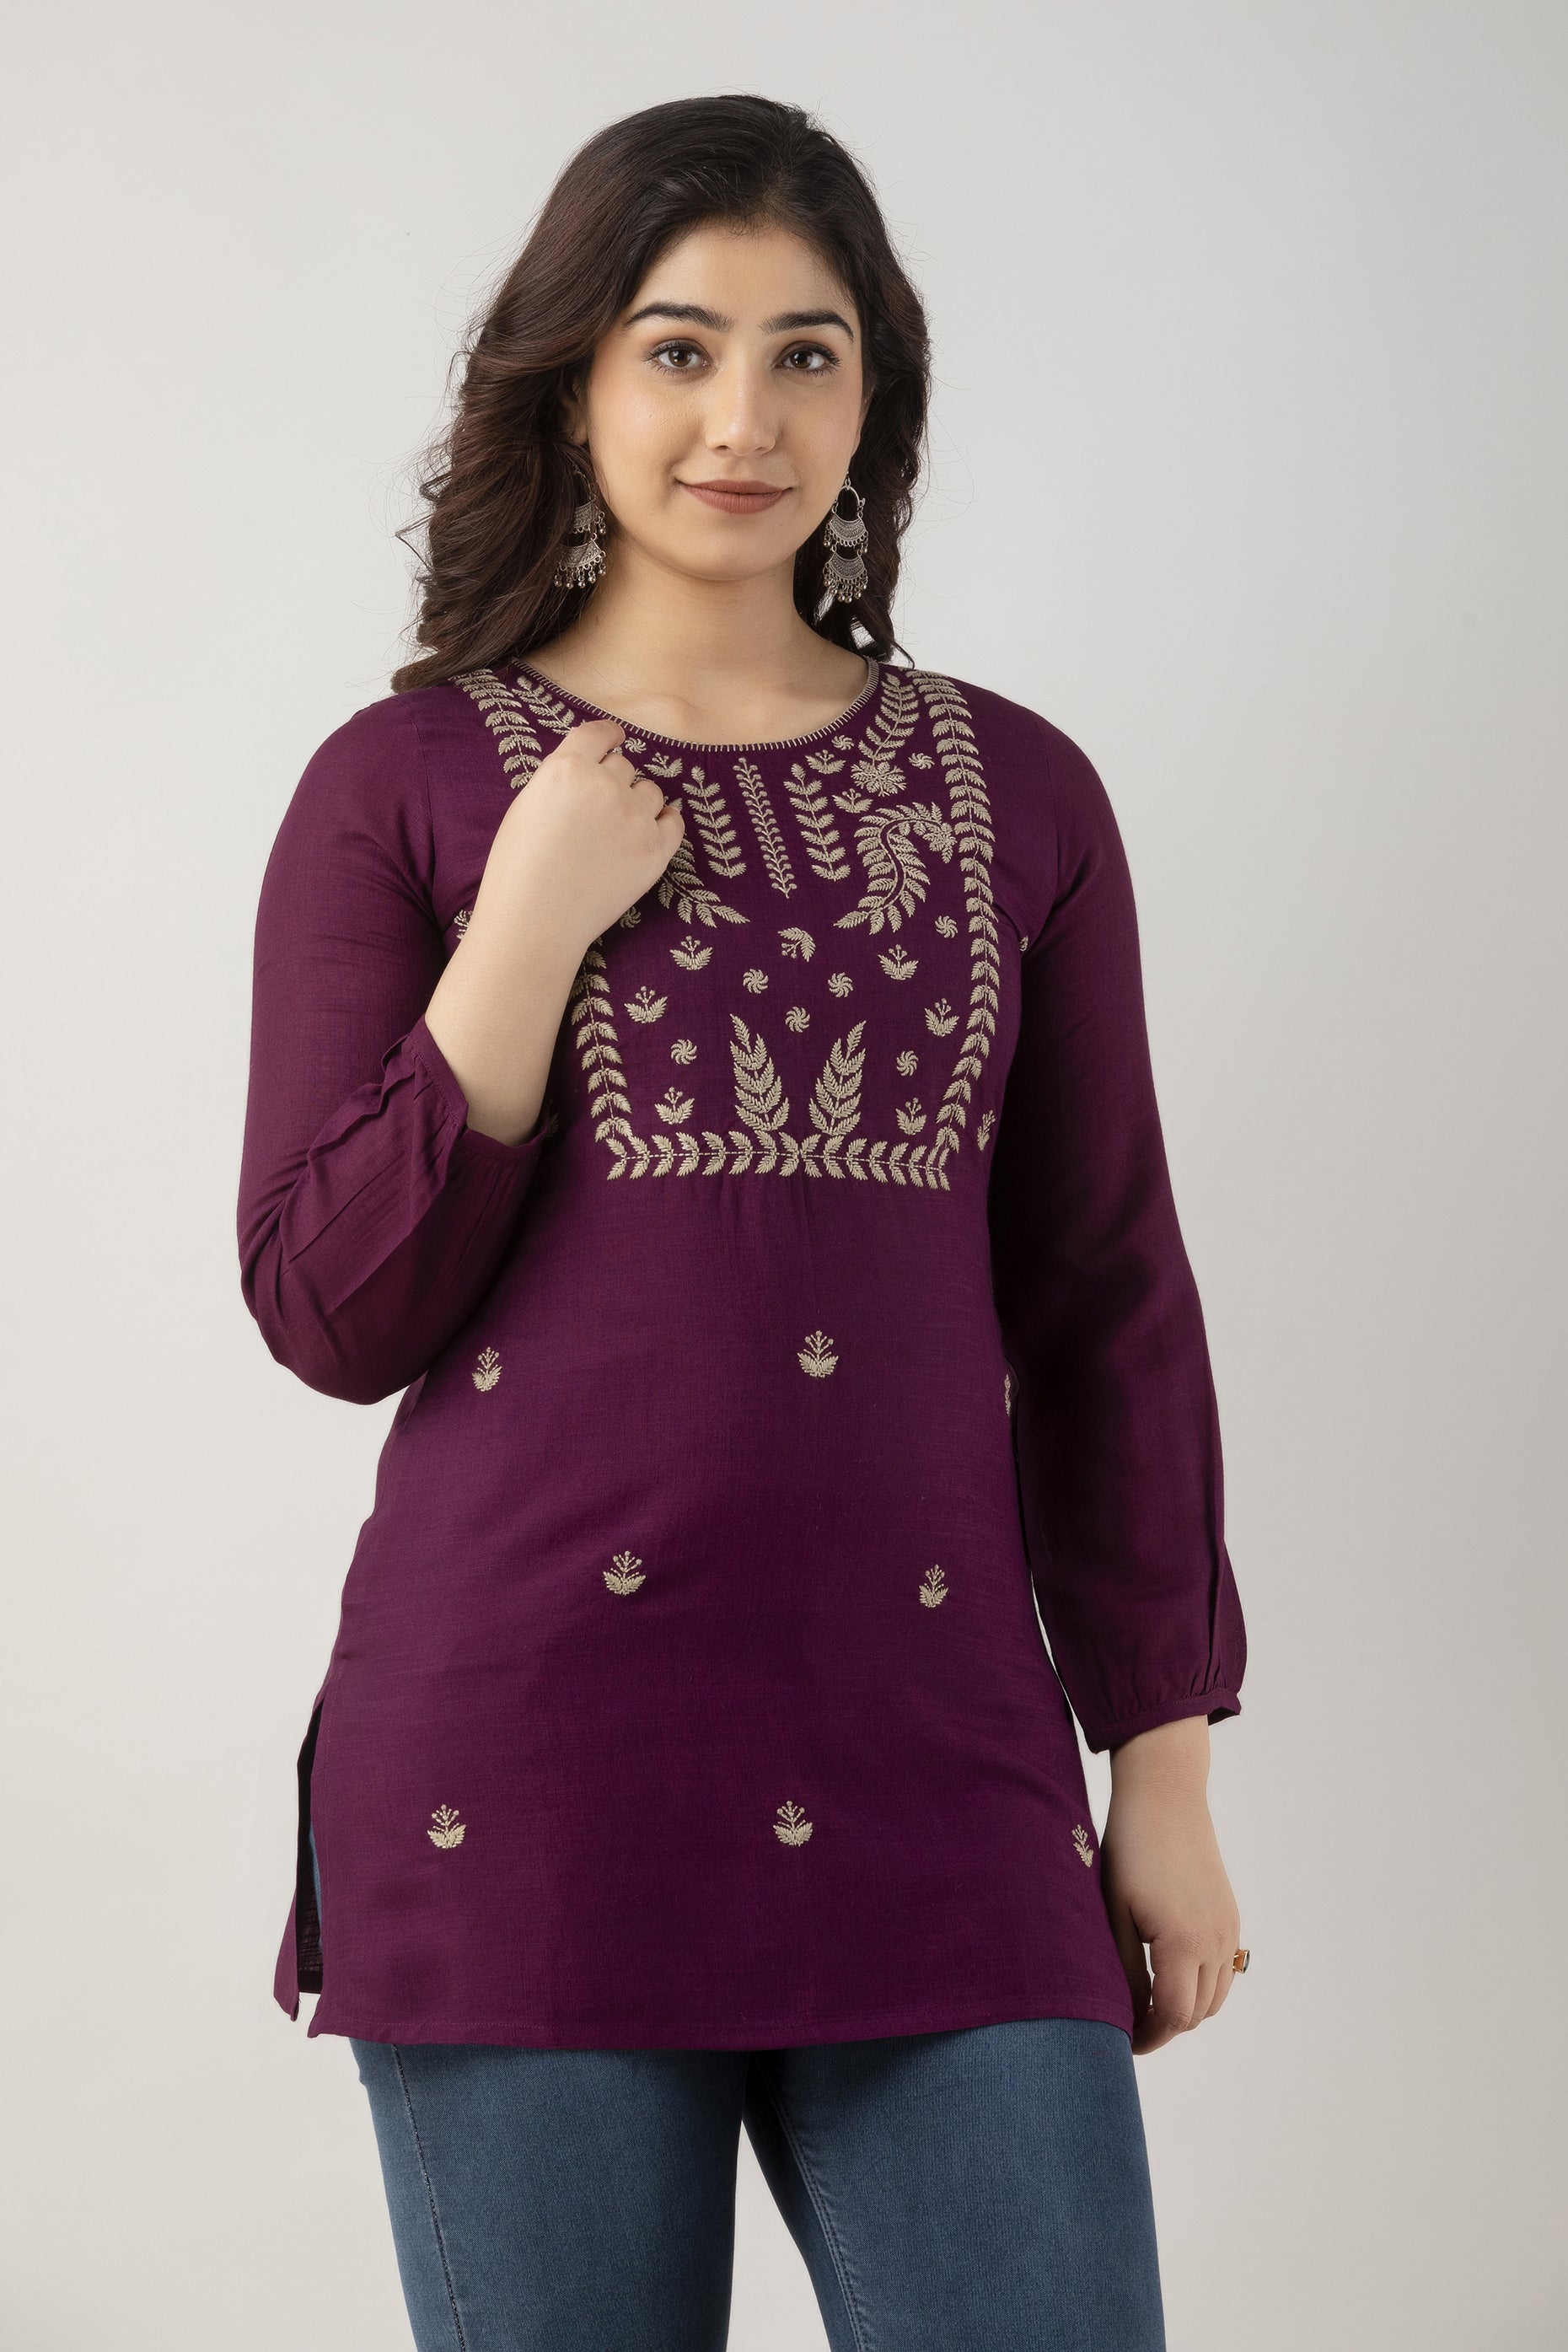 Women's Embroidered Viscose Rayon Regular Top (Voilet) - Charu